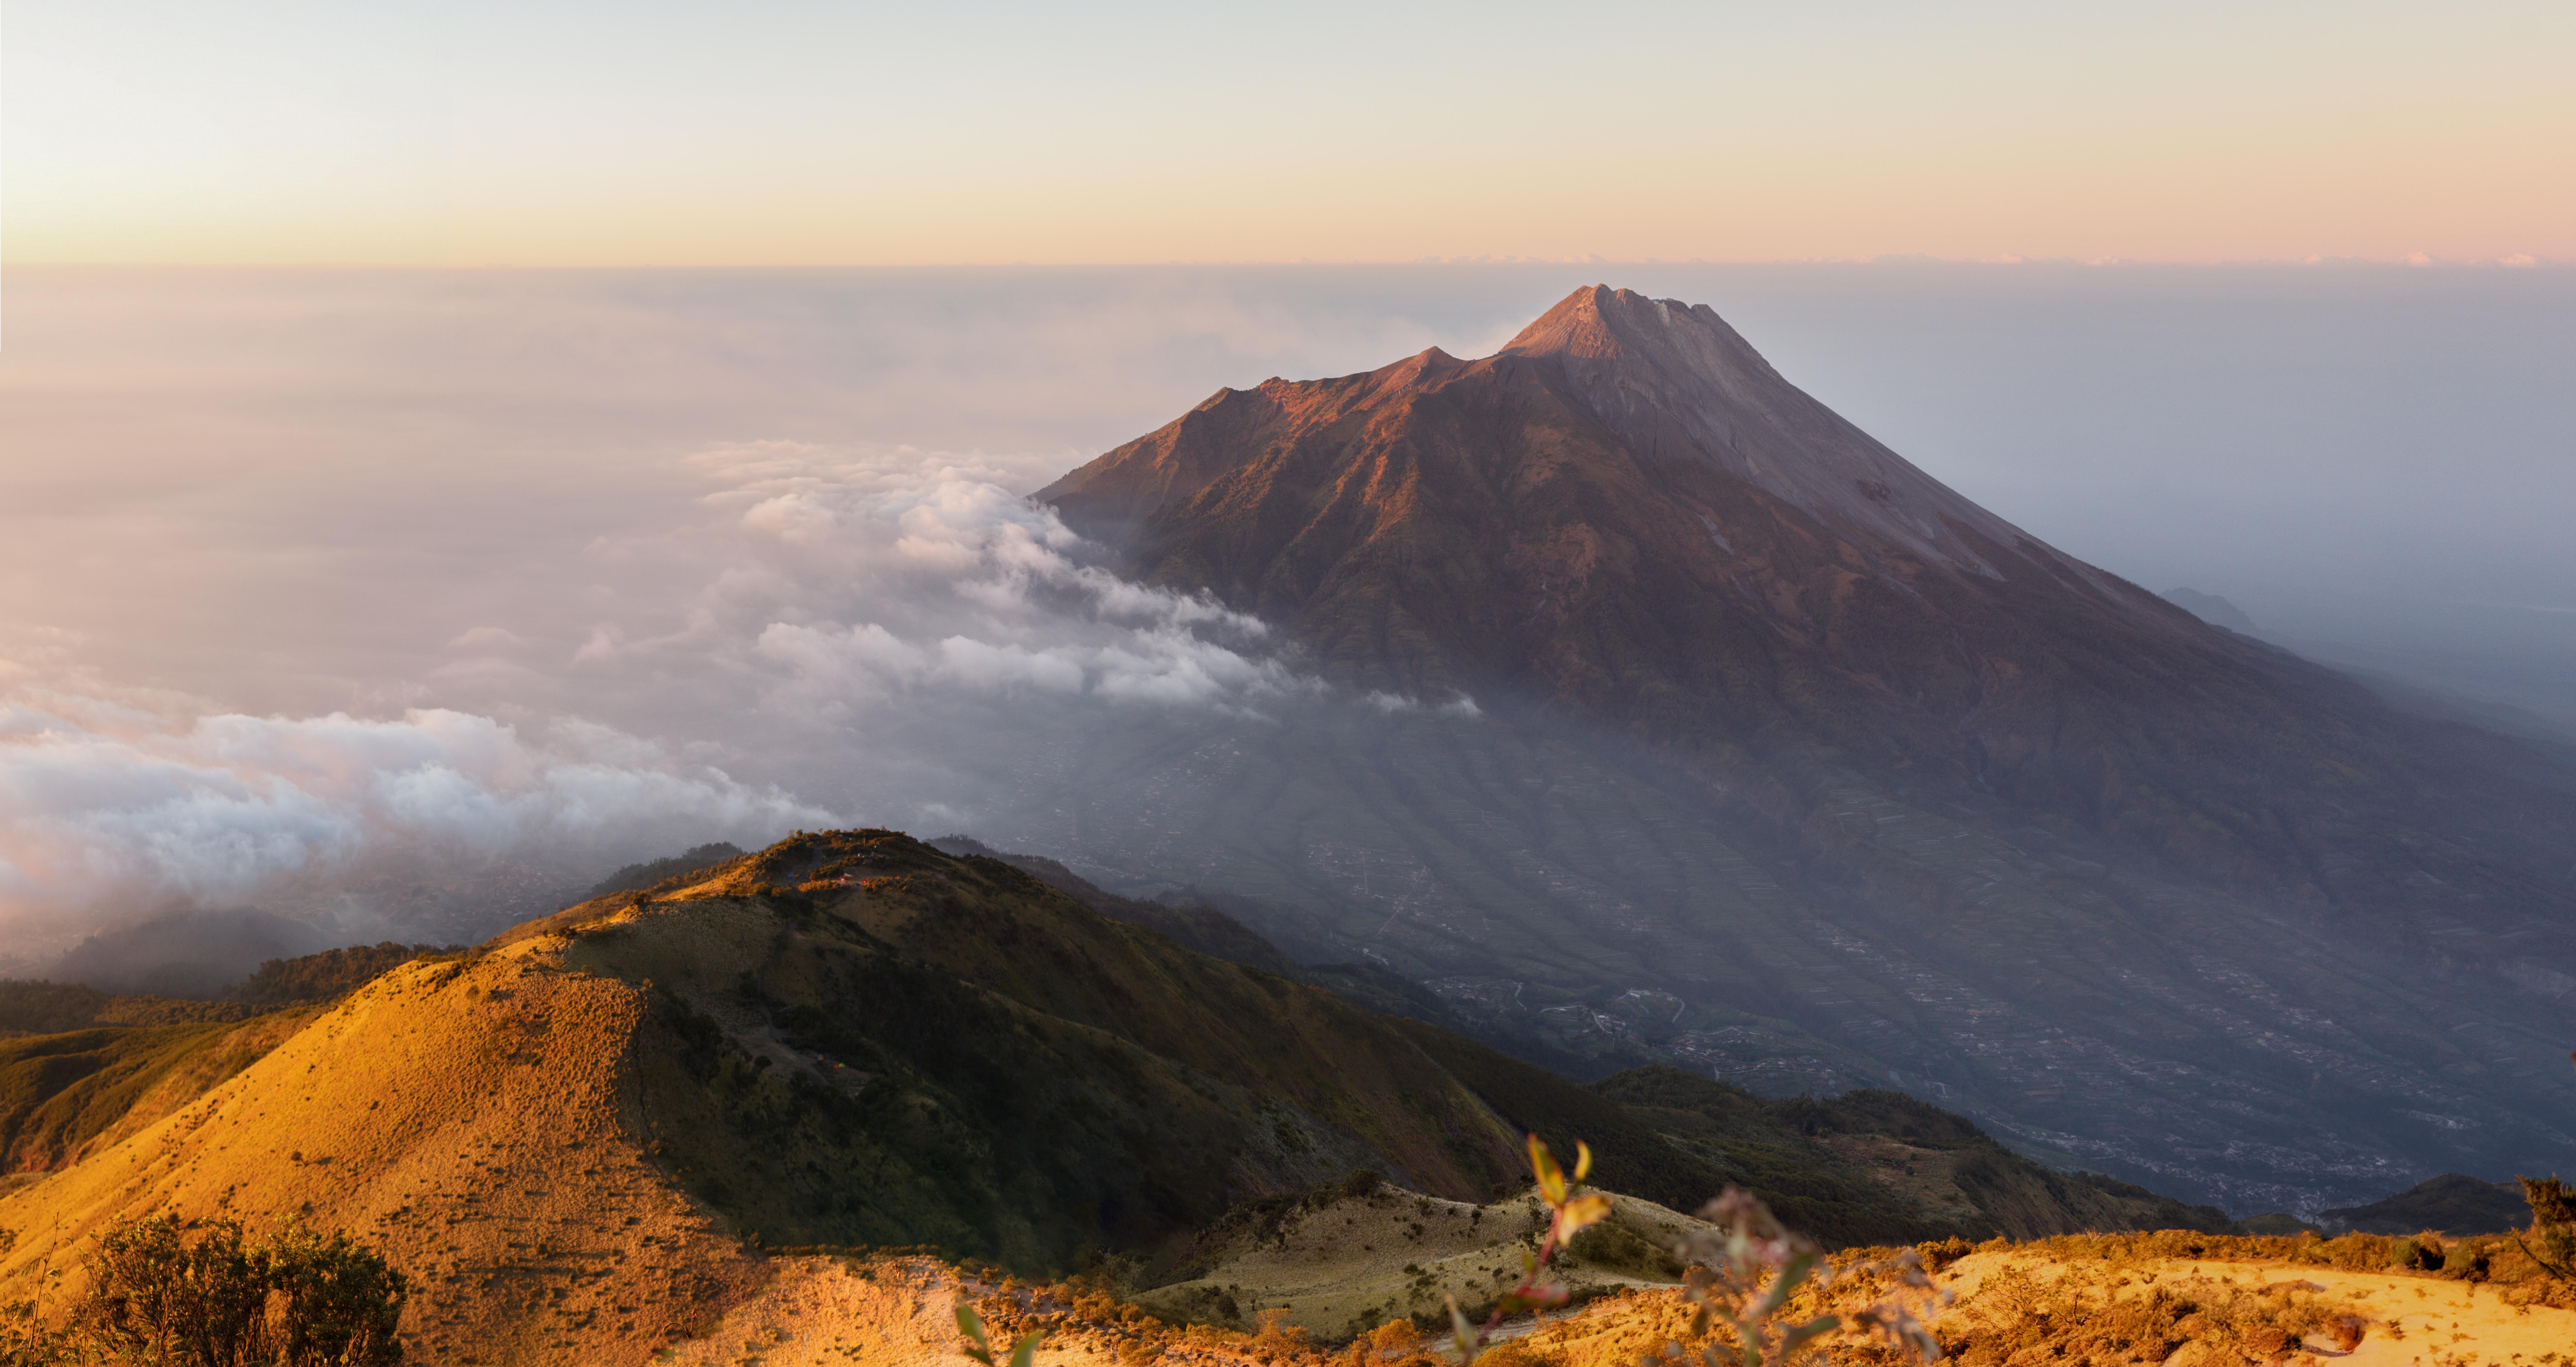 Clouds Mountains Sunset Volcano Java Island Asia Merapi Mount Indonesia Mountain View Mist 9268x4917